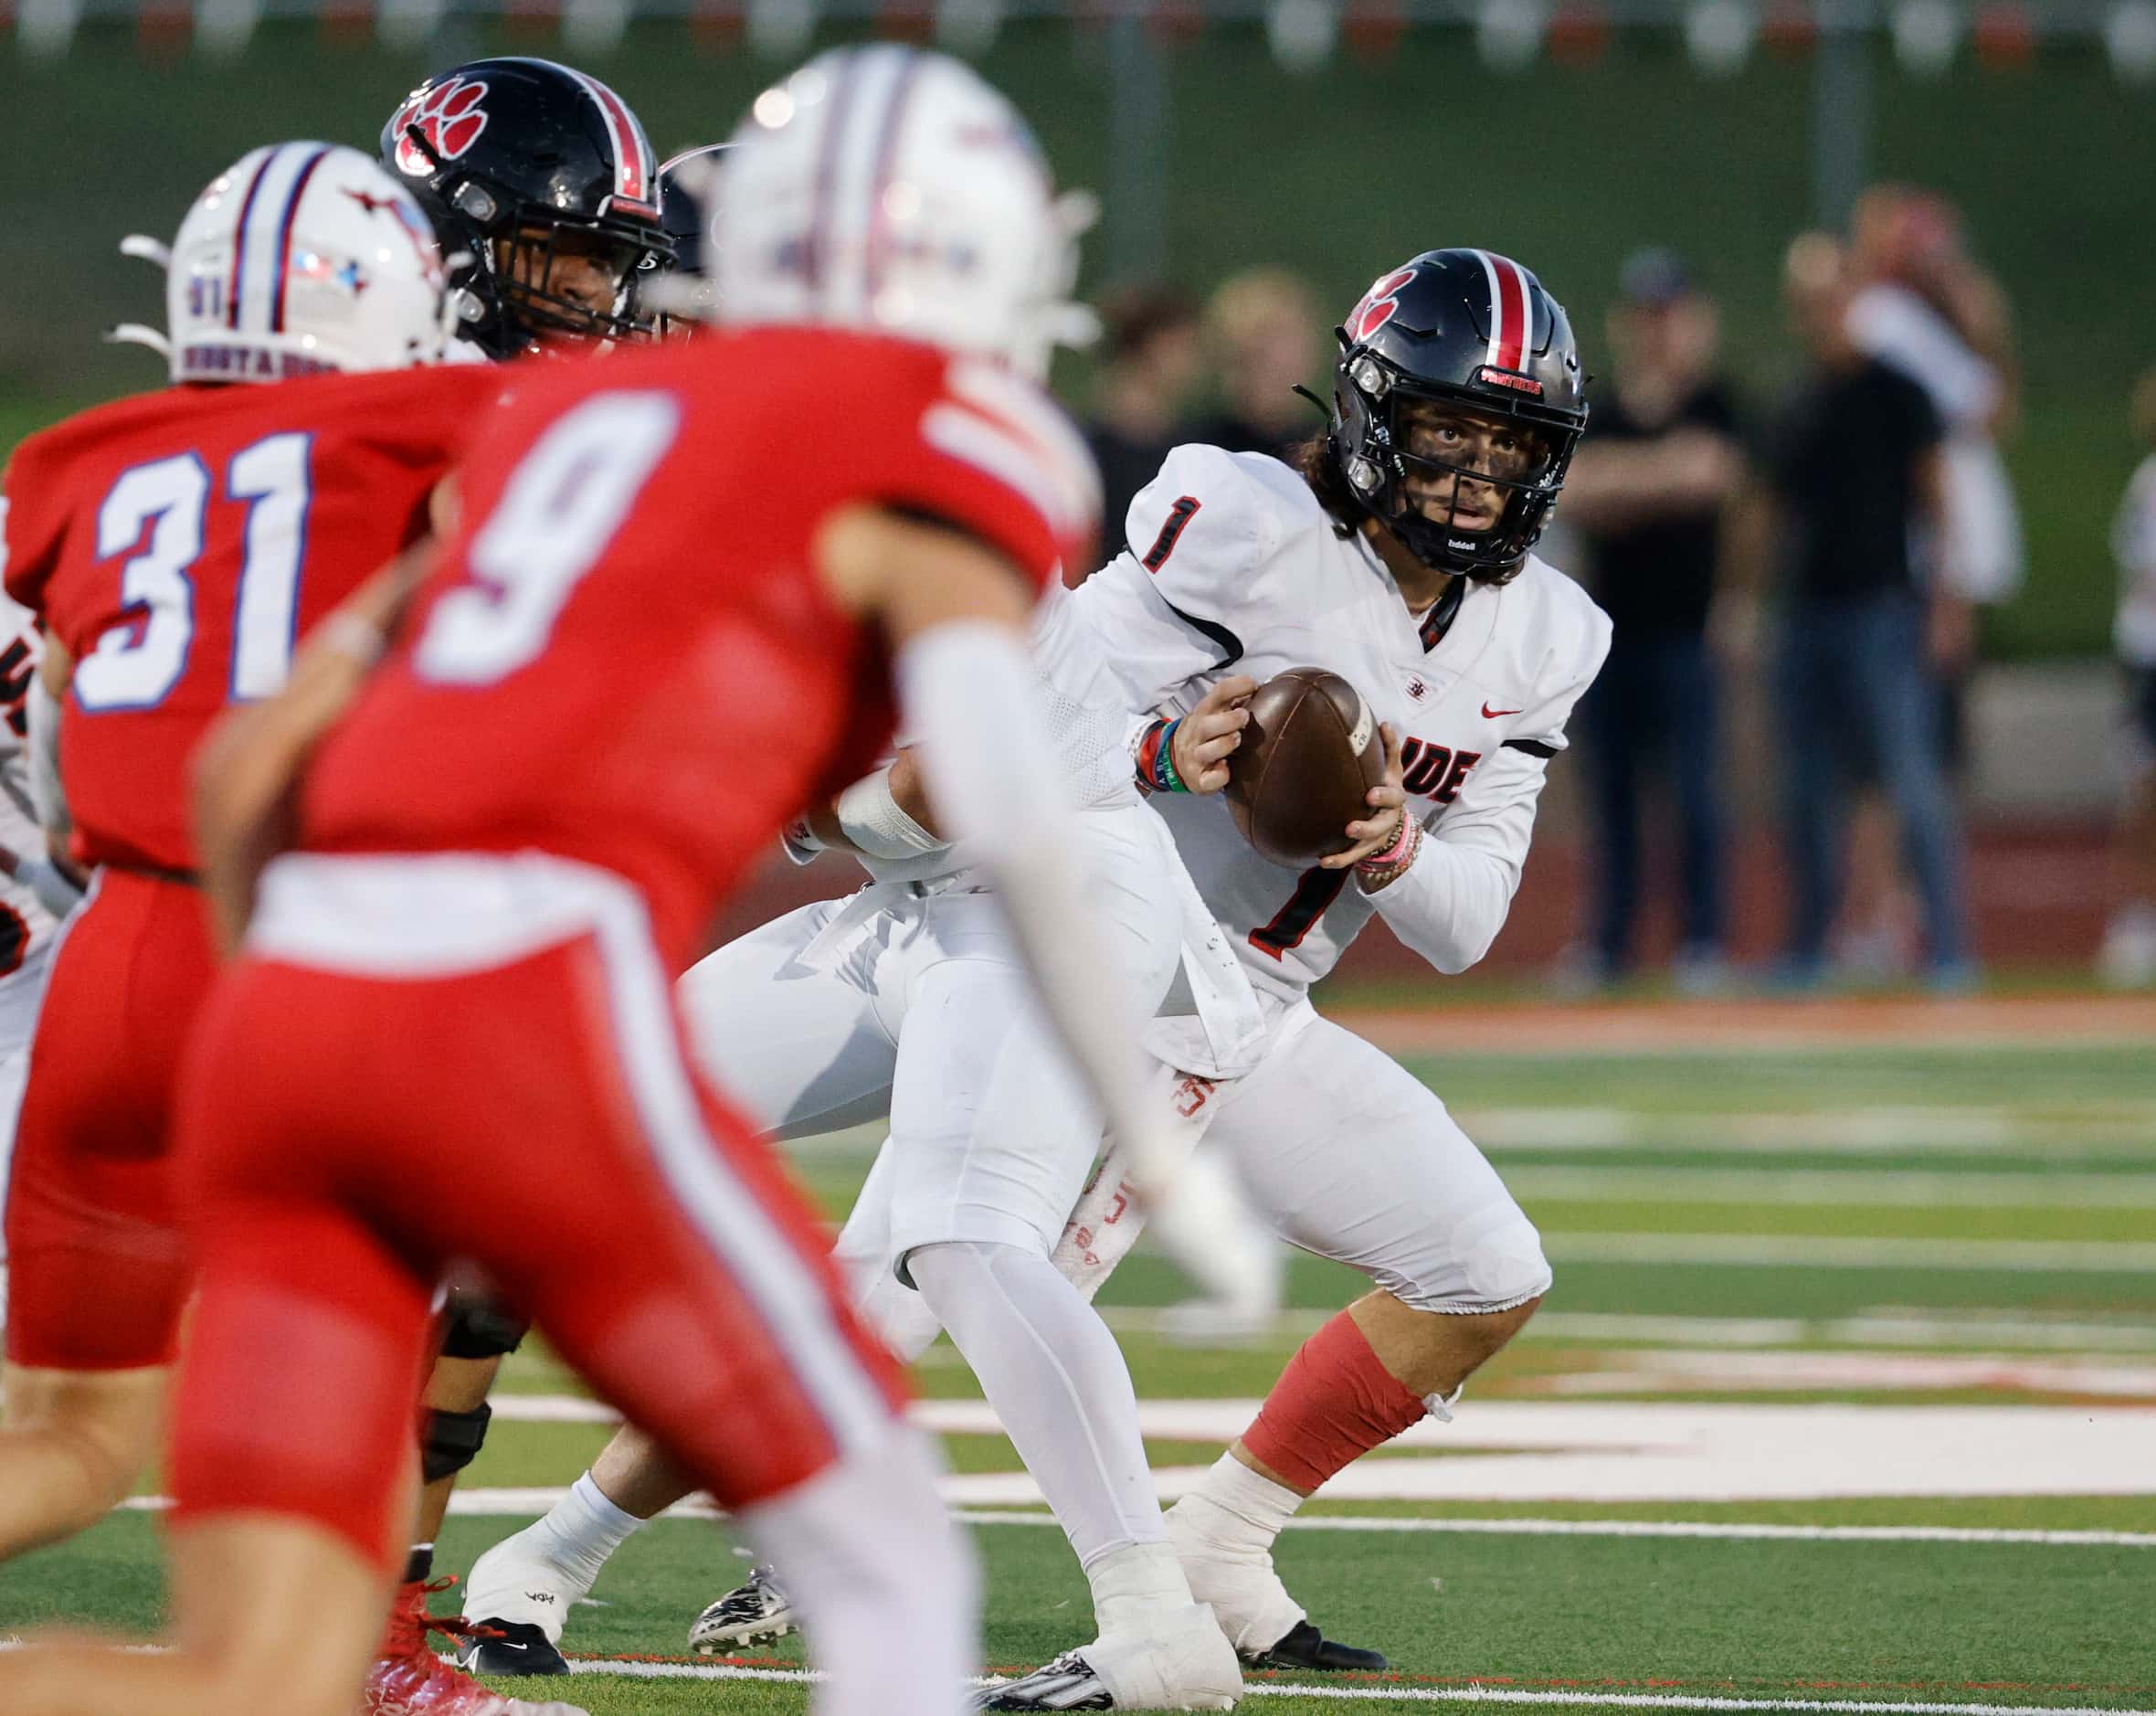 Colleyville Heritage's quarterback Luke Ullrich (1) looks to throw the ball under pressure...